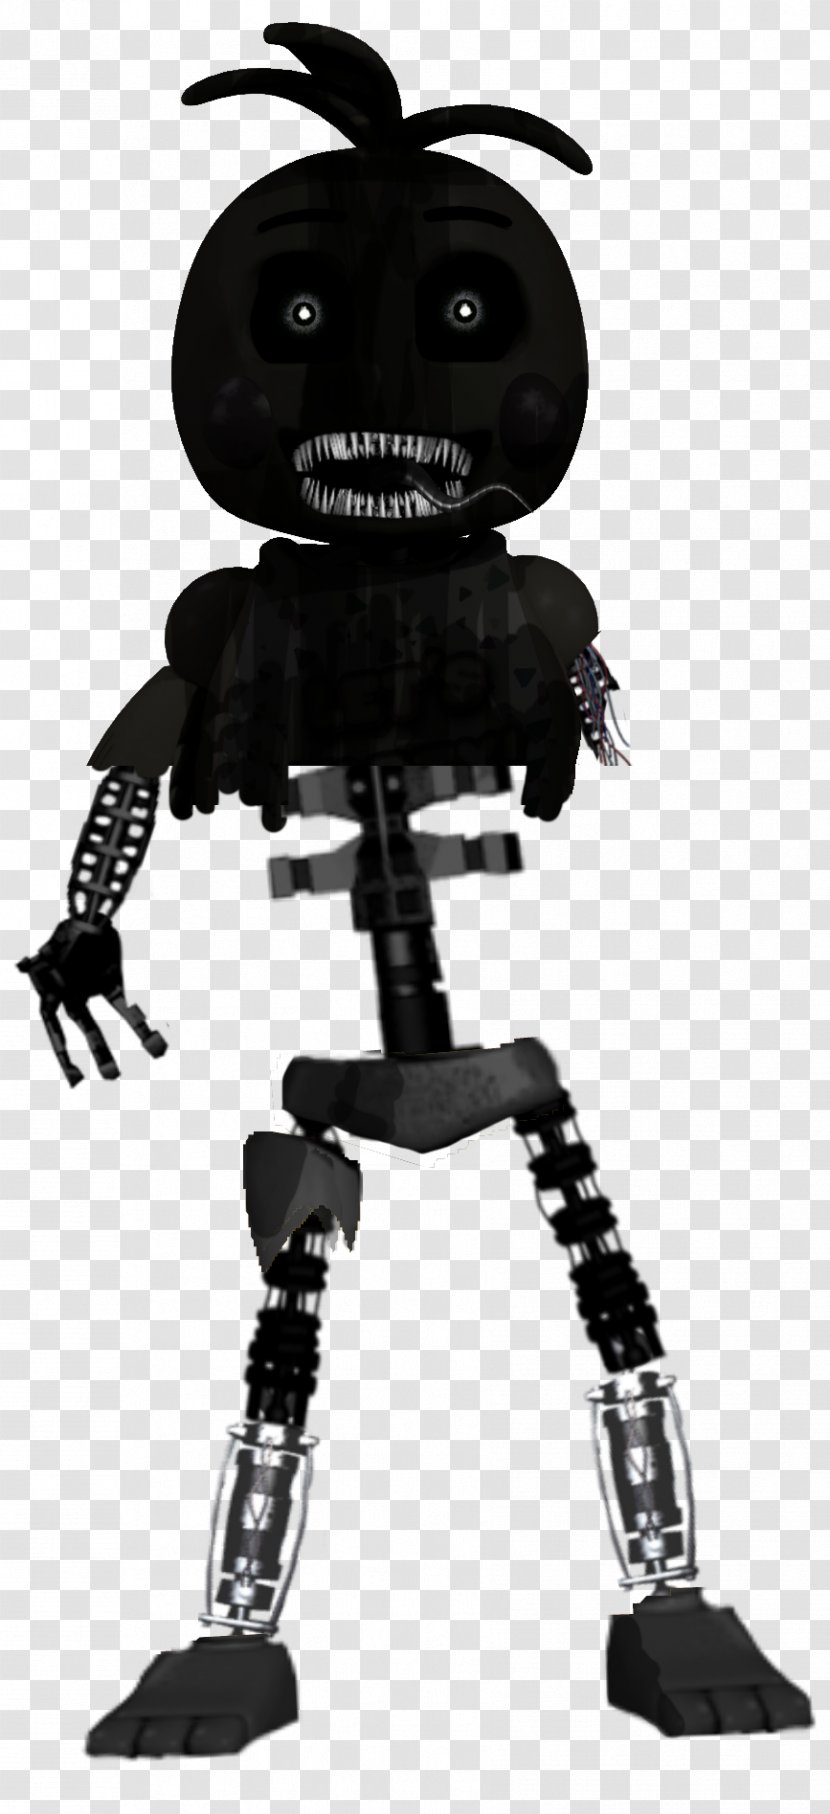 Five Nights At Freddy's 4 Nightmare Toy Black And White - Deviantart Transparent PNG